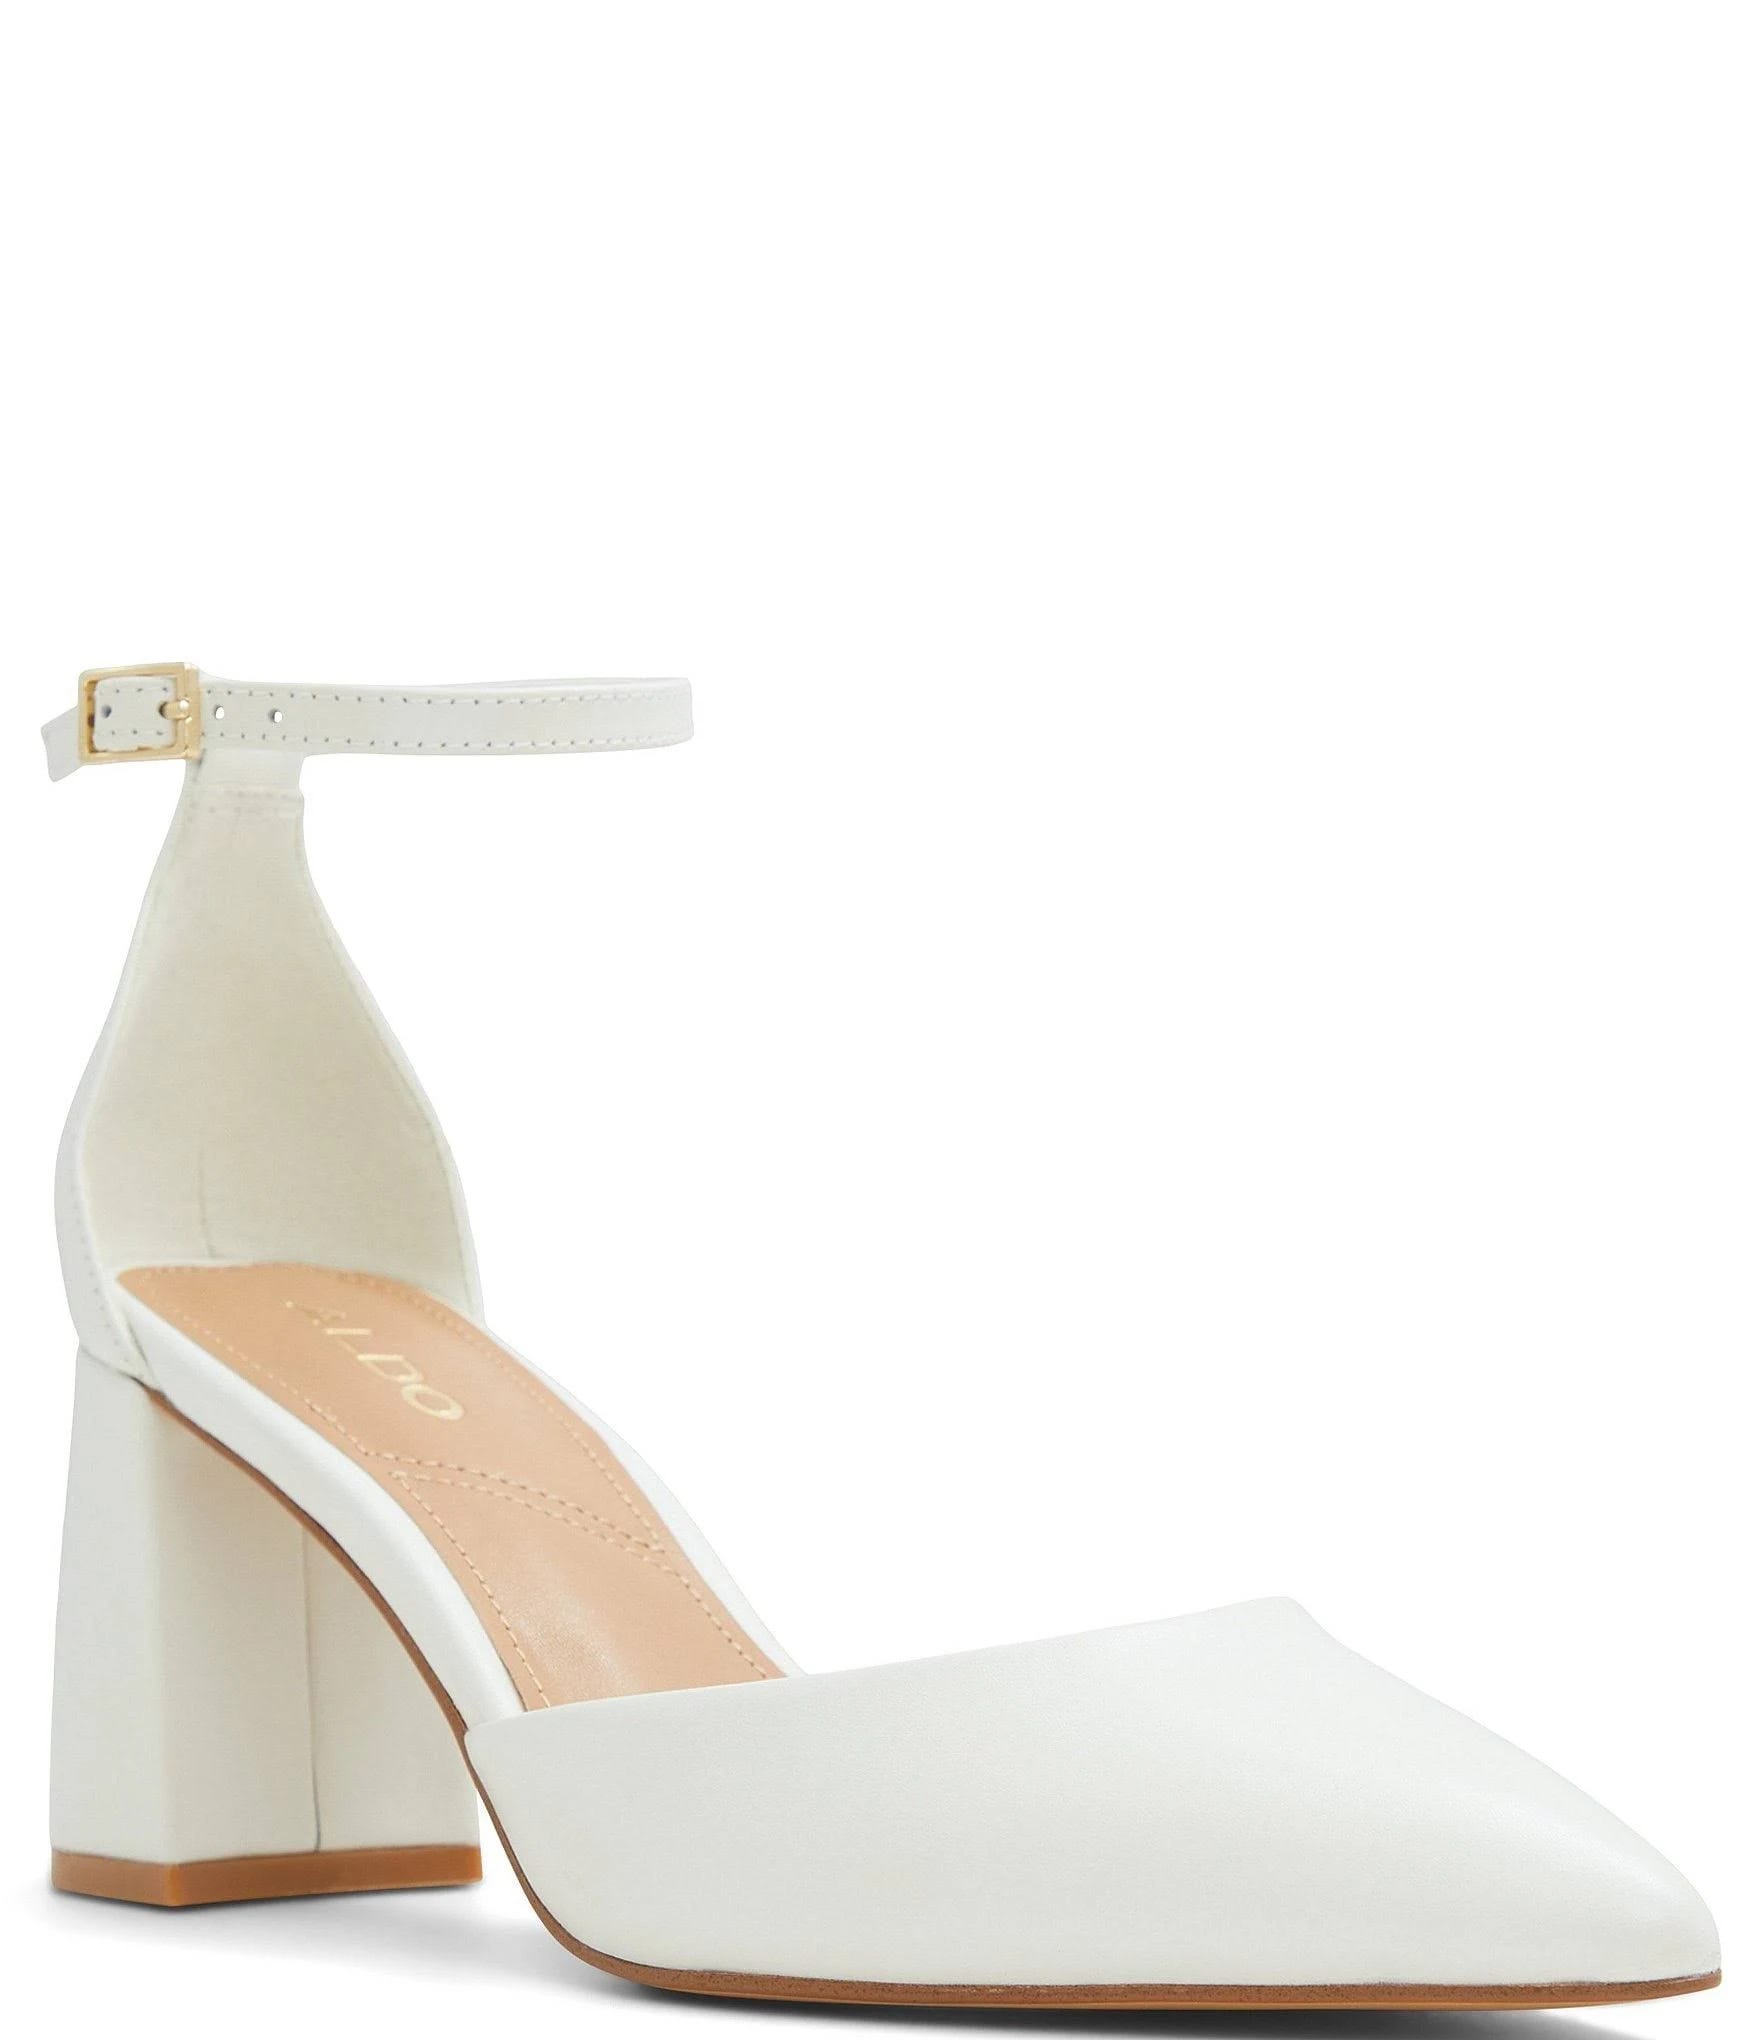 Stylish White Strap-Up Pumps for an Elevated Look | Image